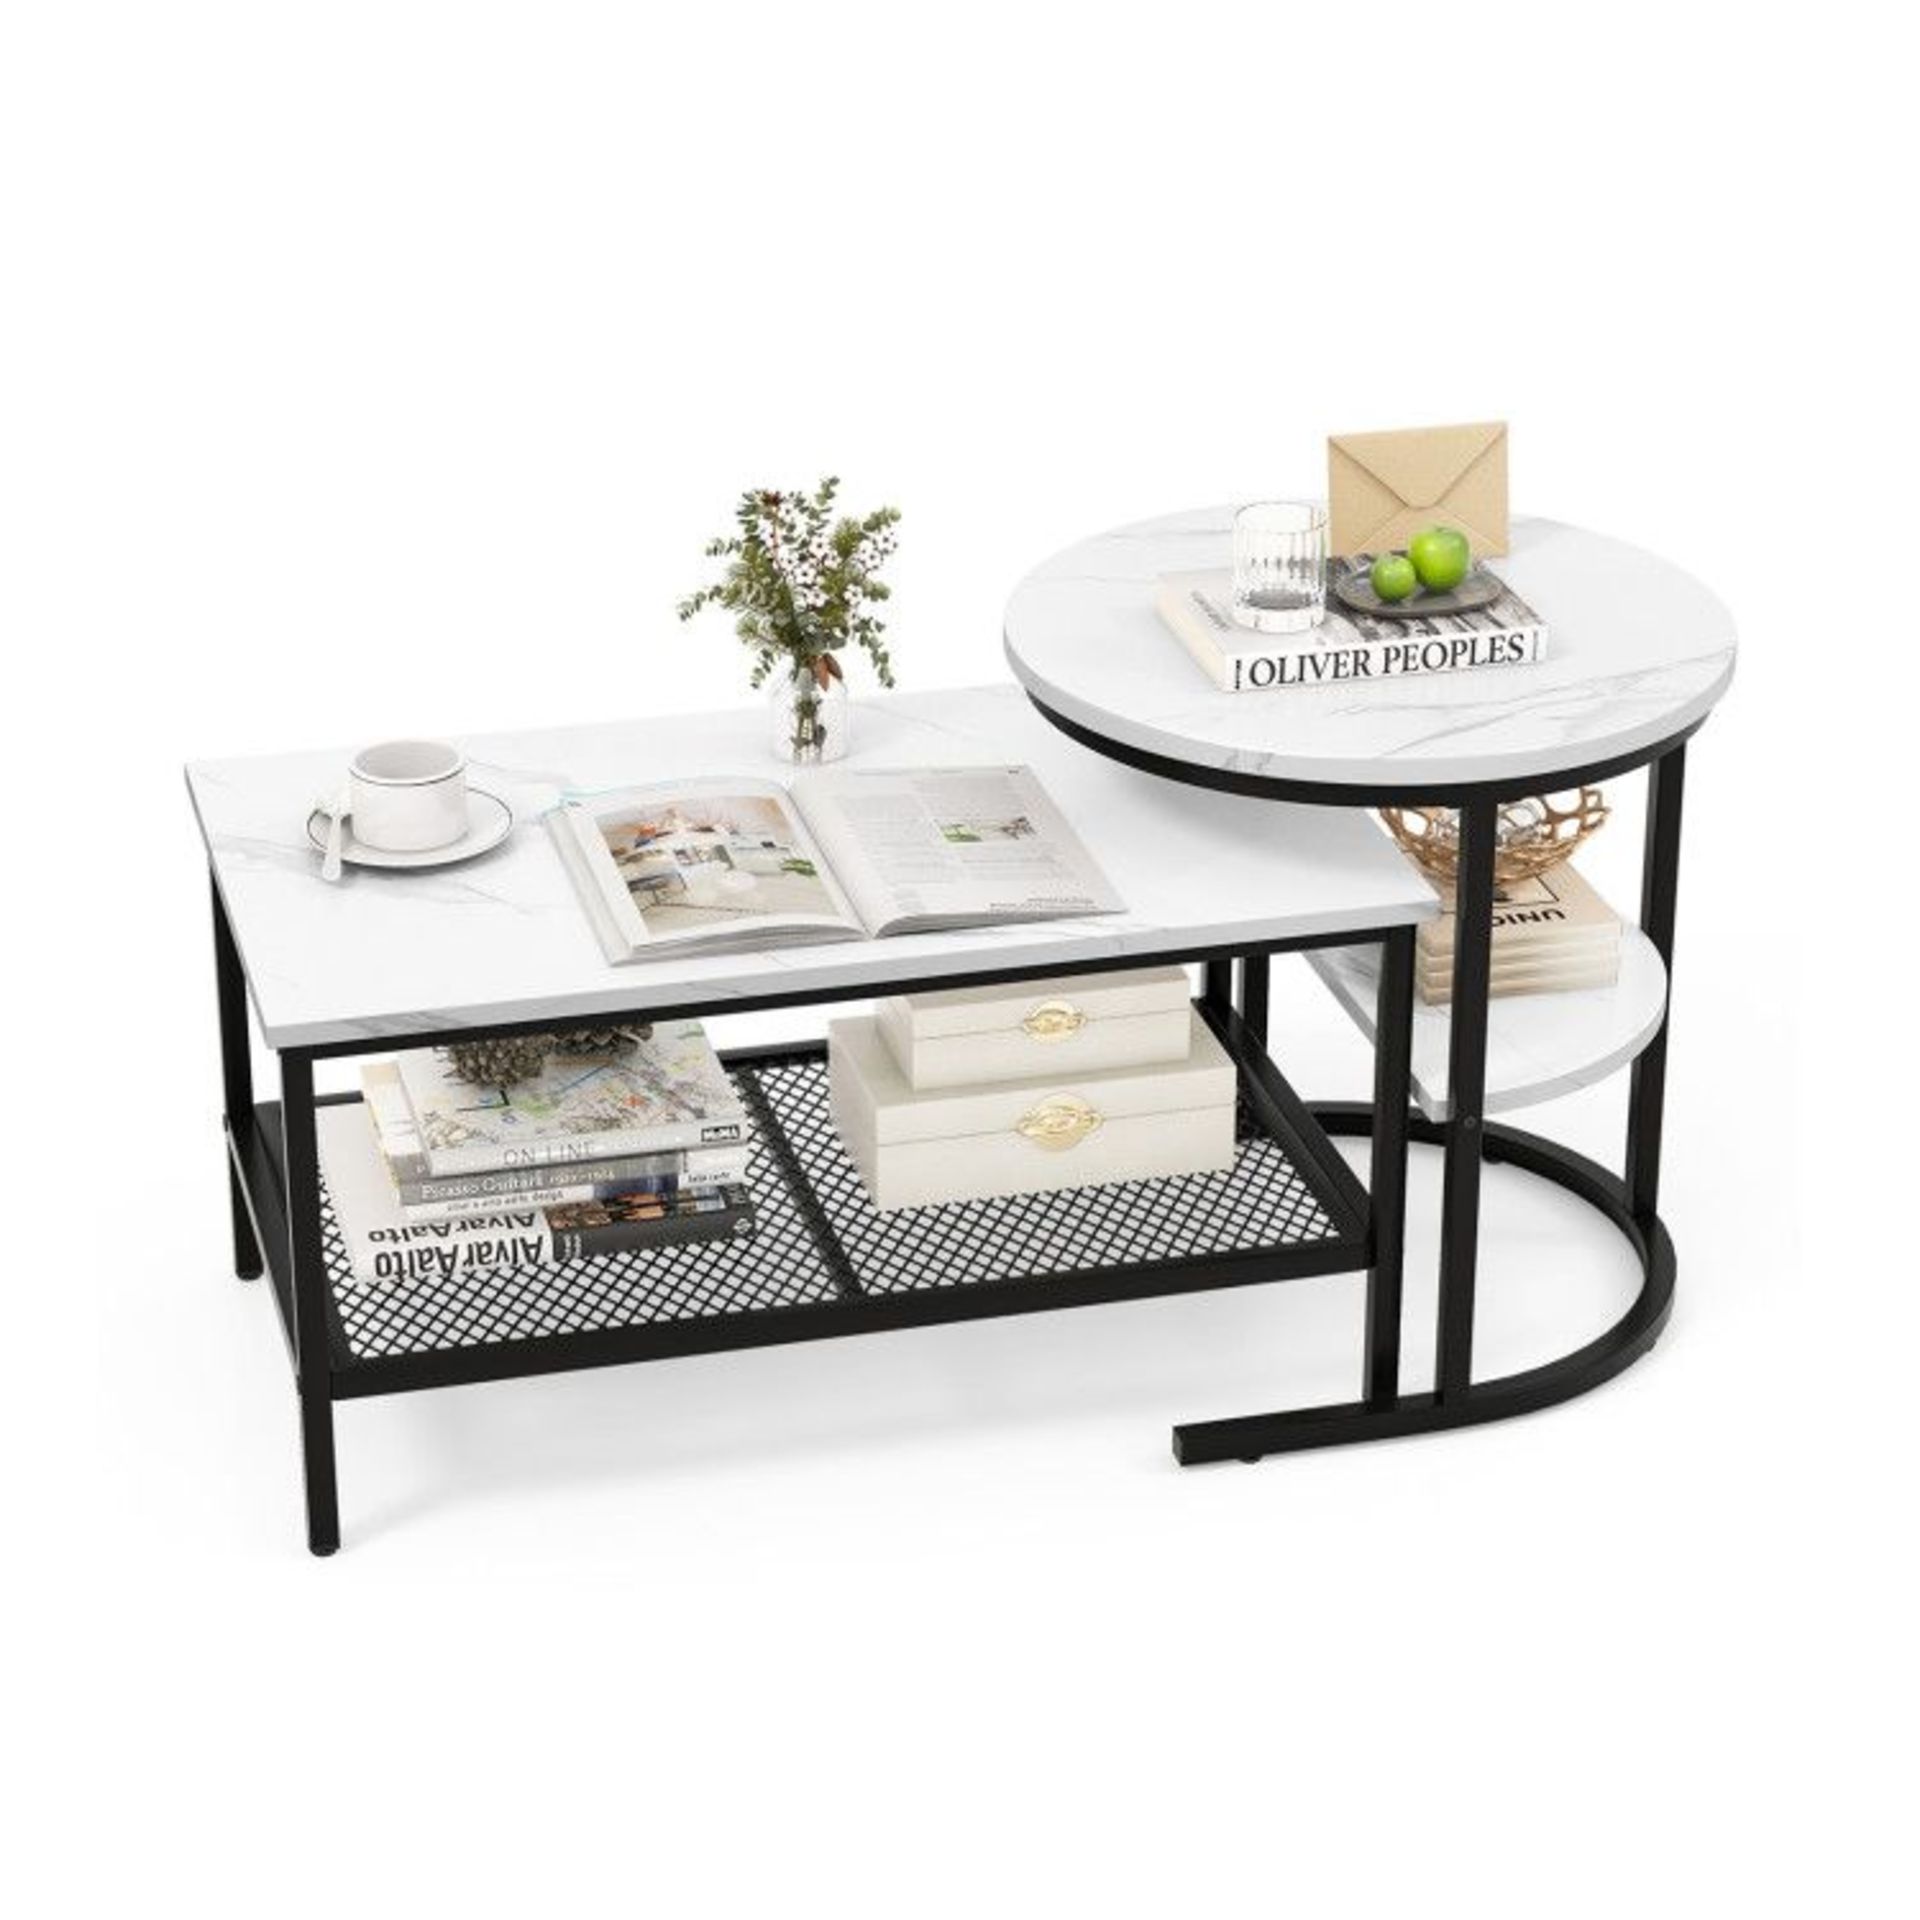 Set of 2 Nesting Coffee Table with Extra Storage Shelf for Living Room. -R13a.5. This 2-piece coffee